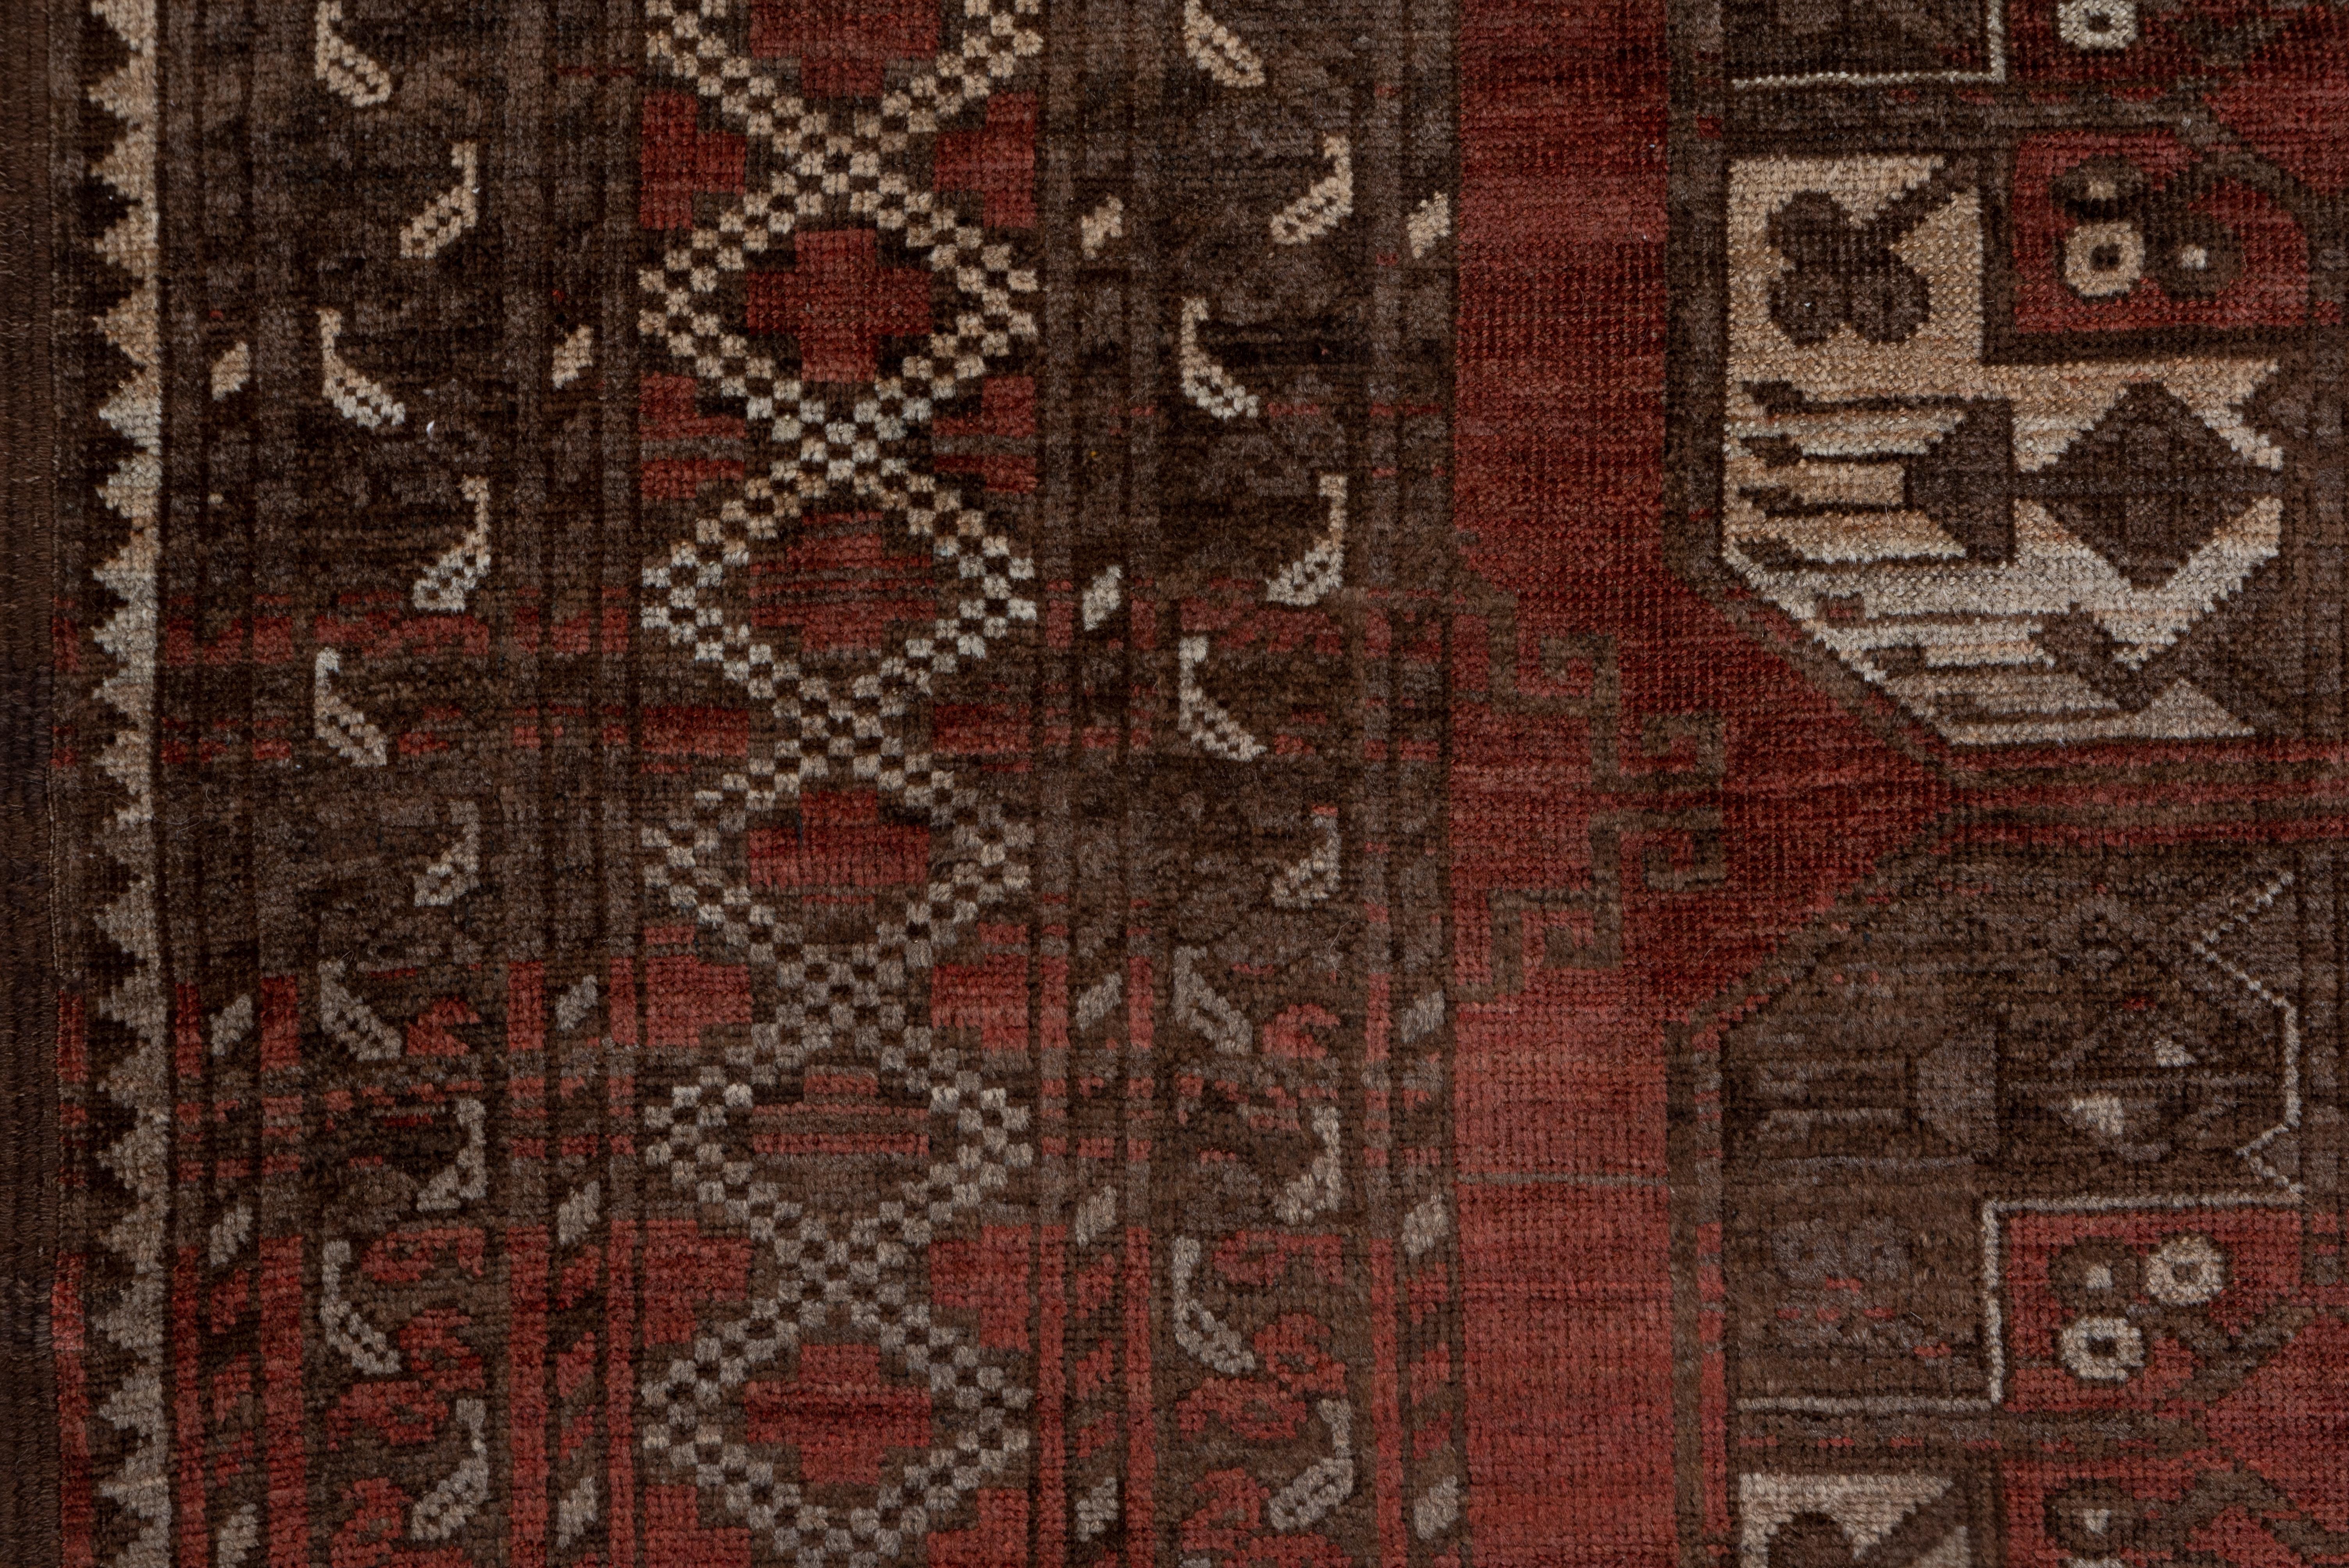 Antique Red Turkmen Ersari Carpet In Good Condition For Sale In New York, NY